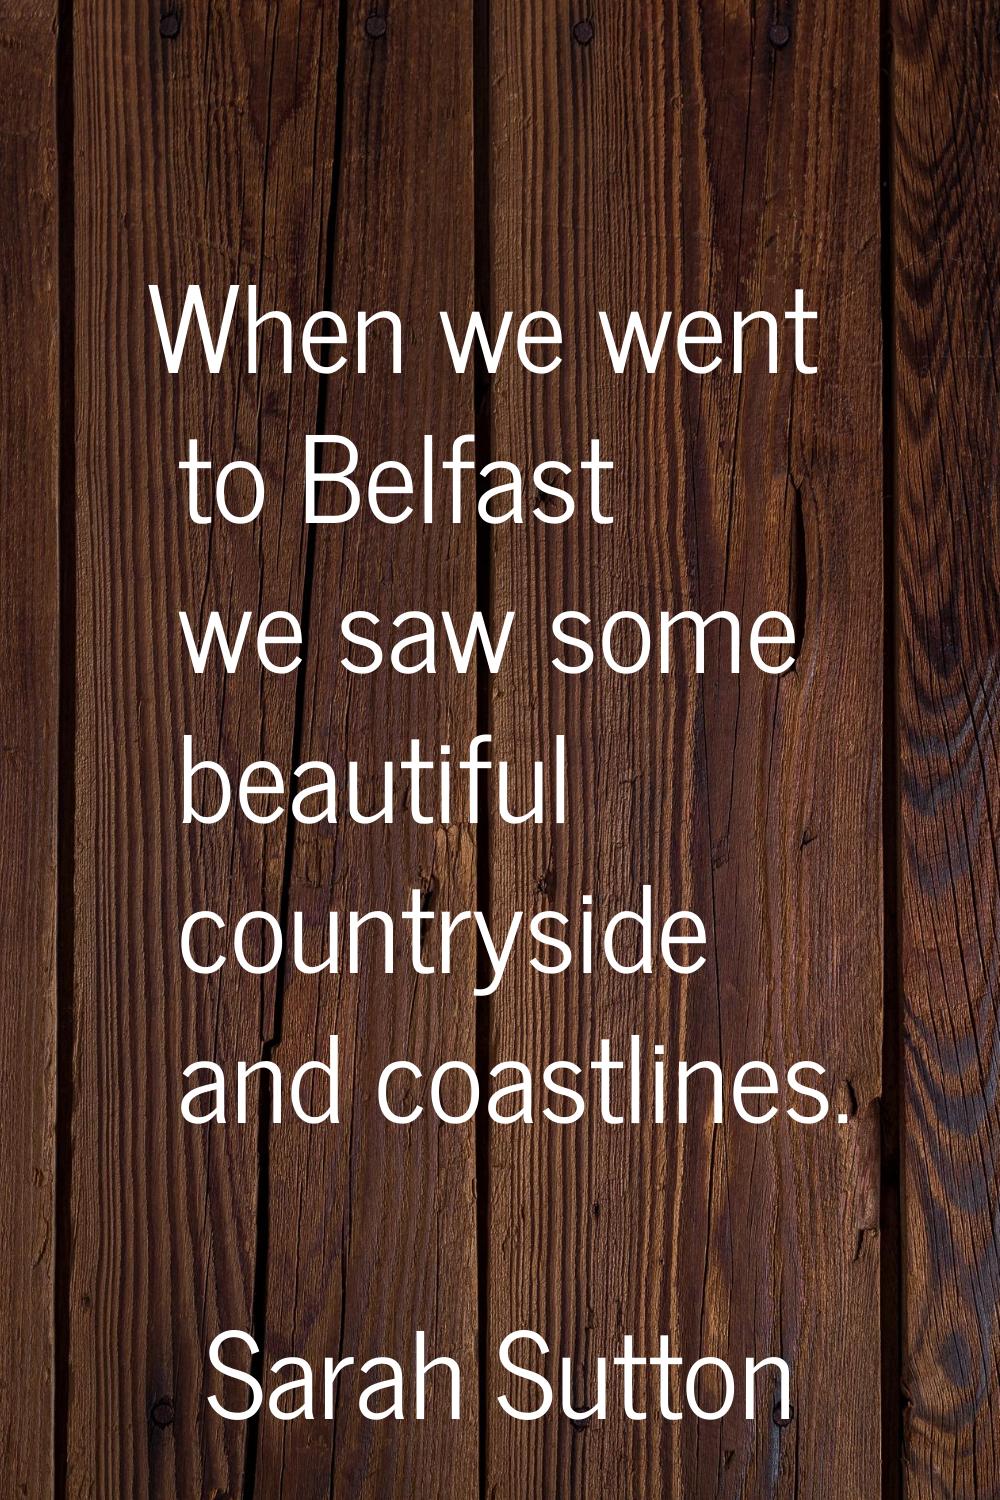 When we went to Belfast we saw some beautiful countryside and coastlines.